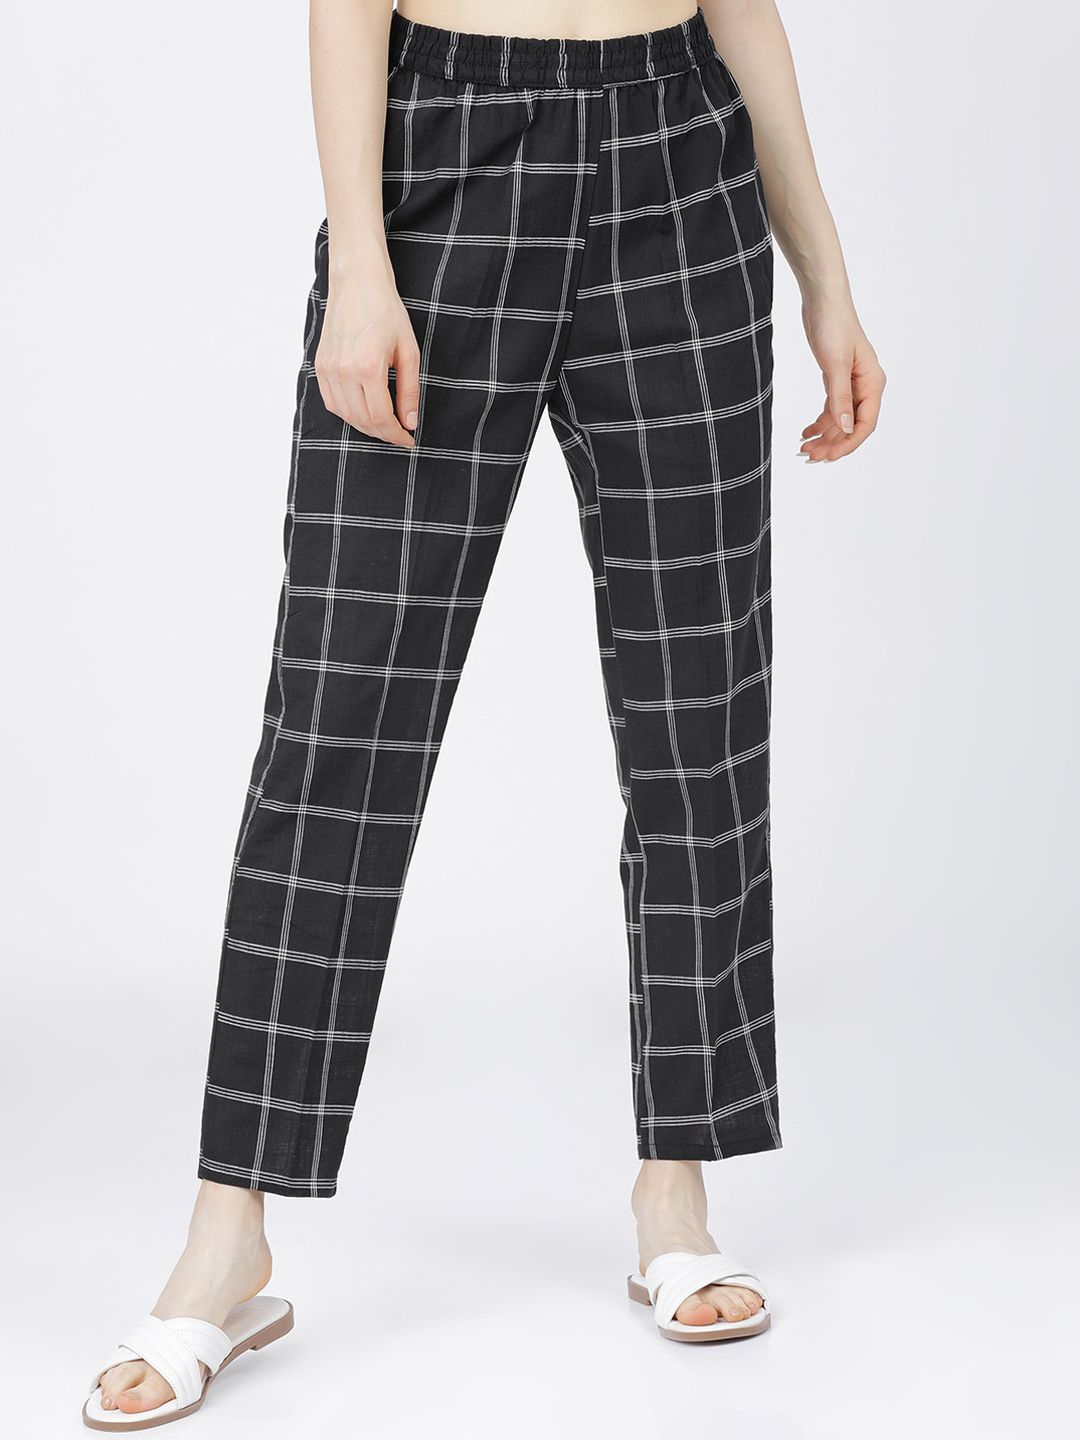 Vishudh Women Black Checked Slim Fit Trousers Price in India